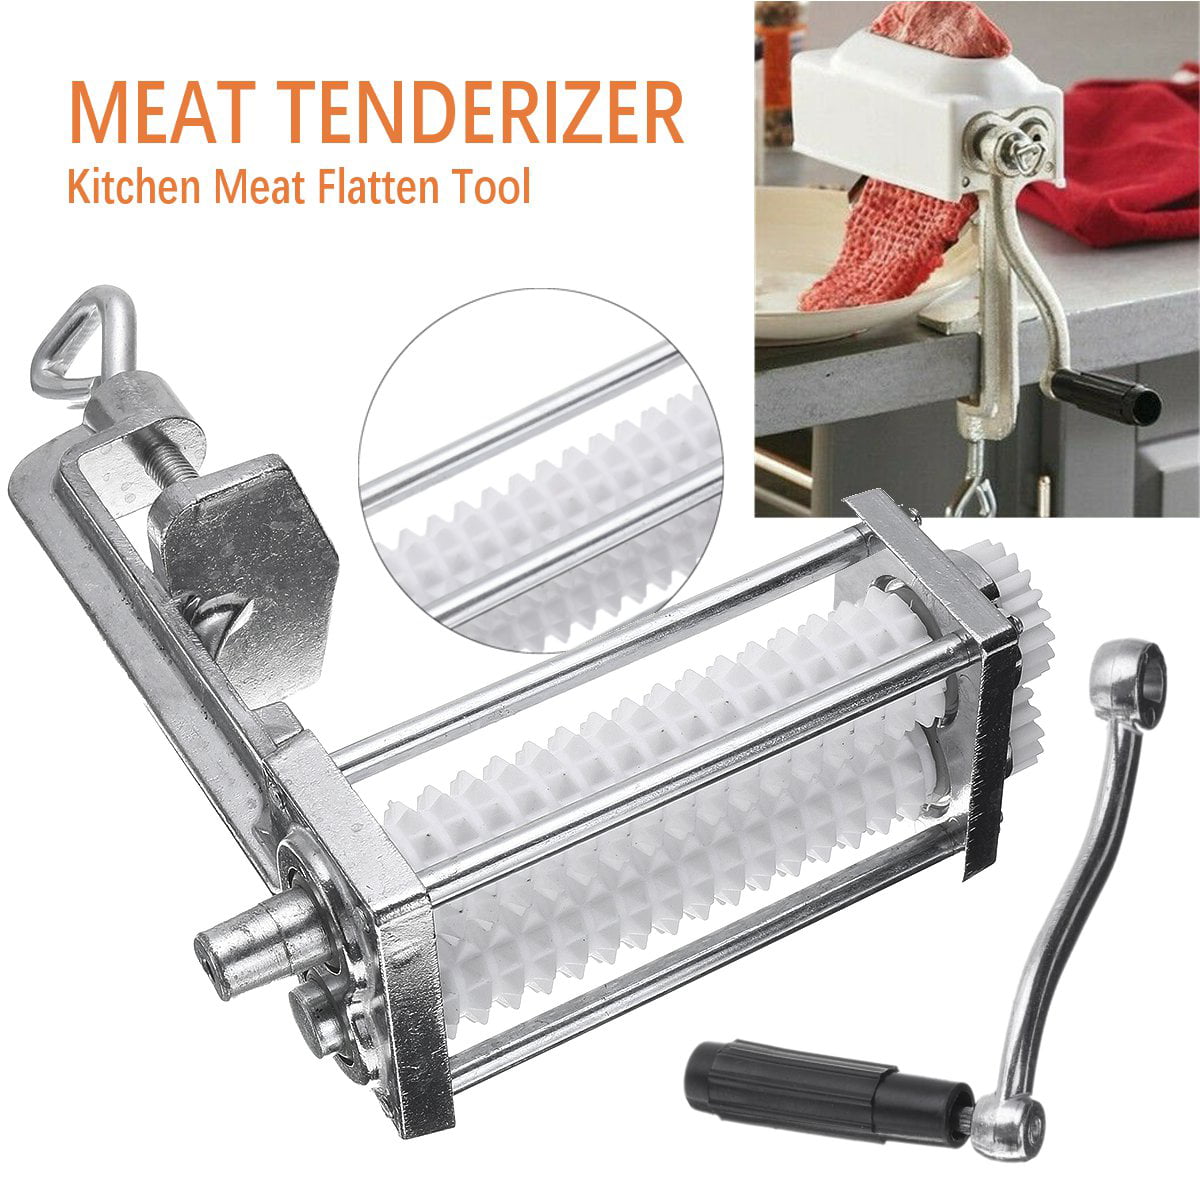 Meat Cuber Tenderizer Attachment Small Appliances Grinders for sale online 